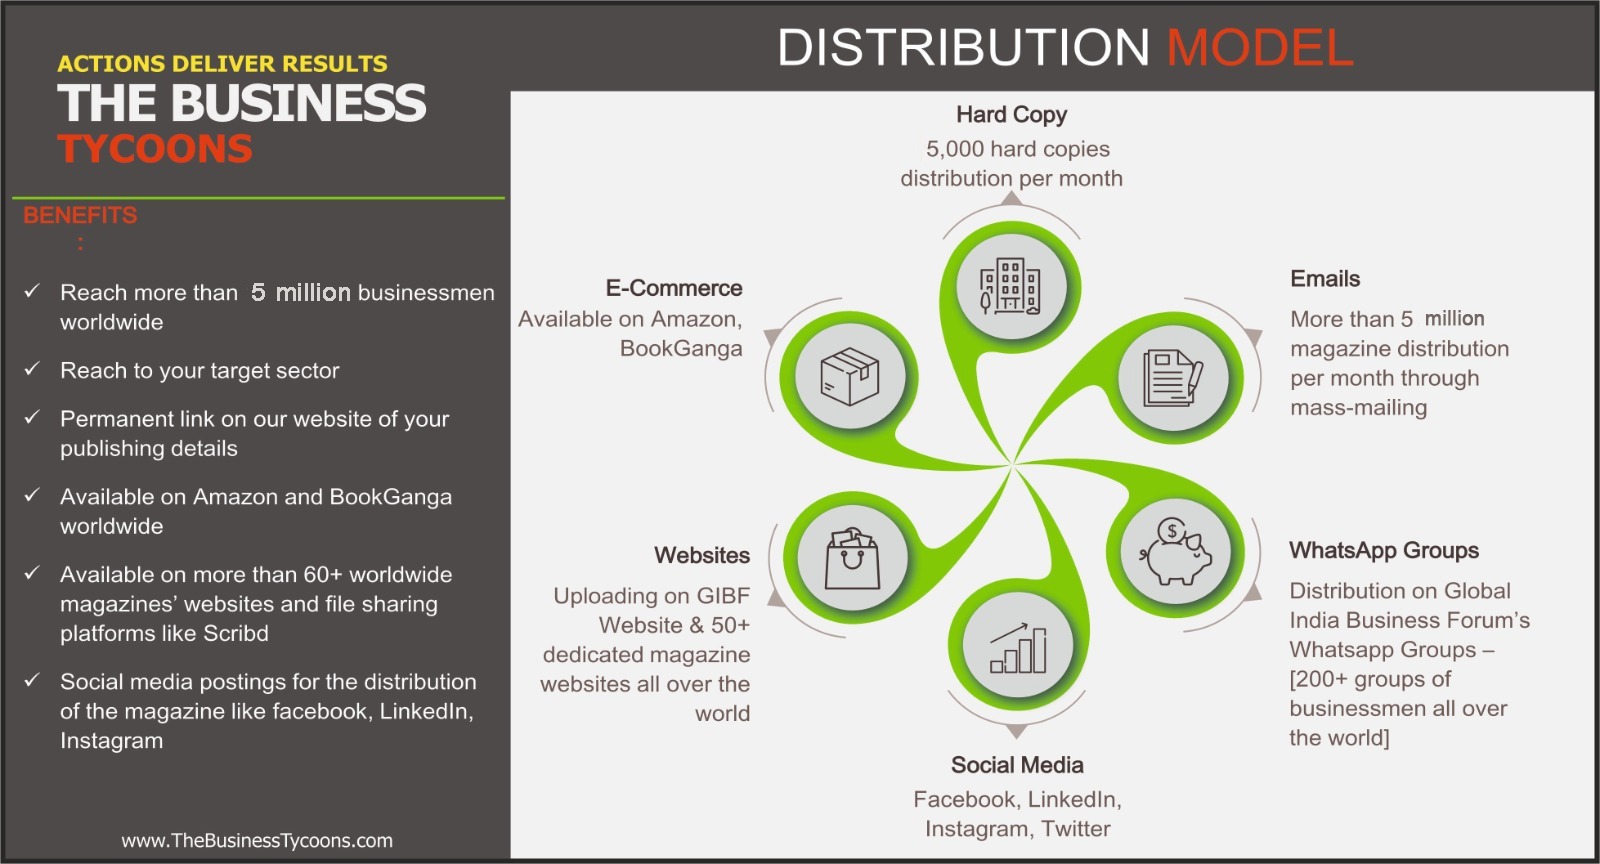 The Business Tycoons - Distribution Model